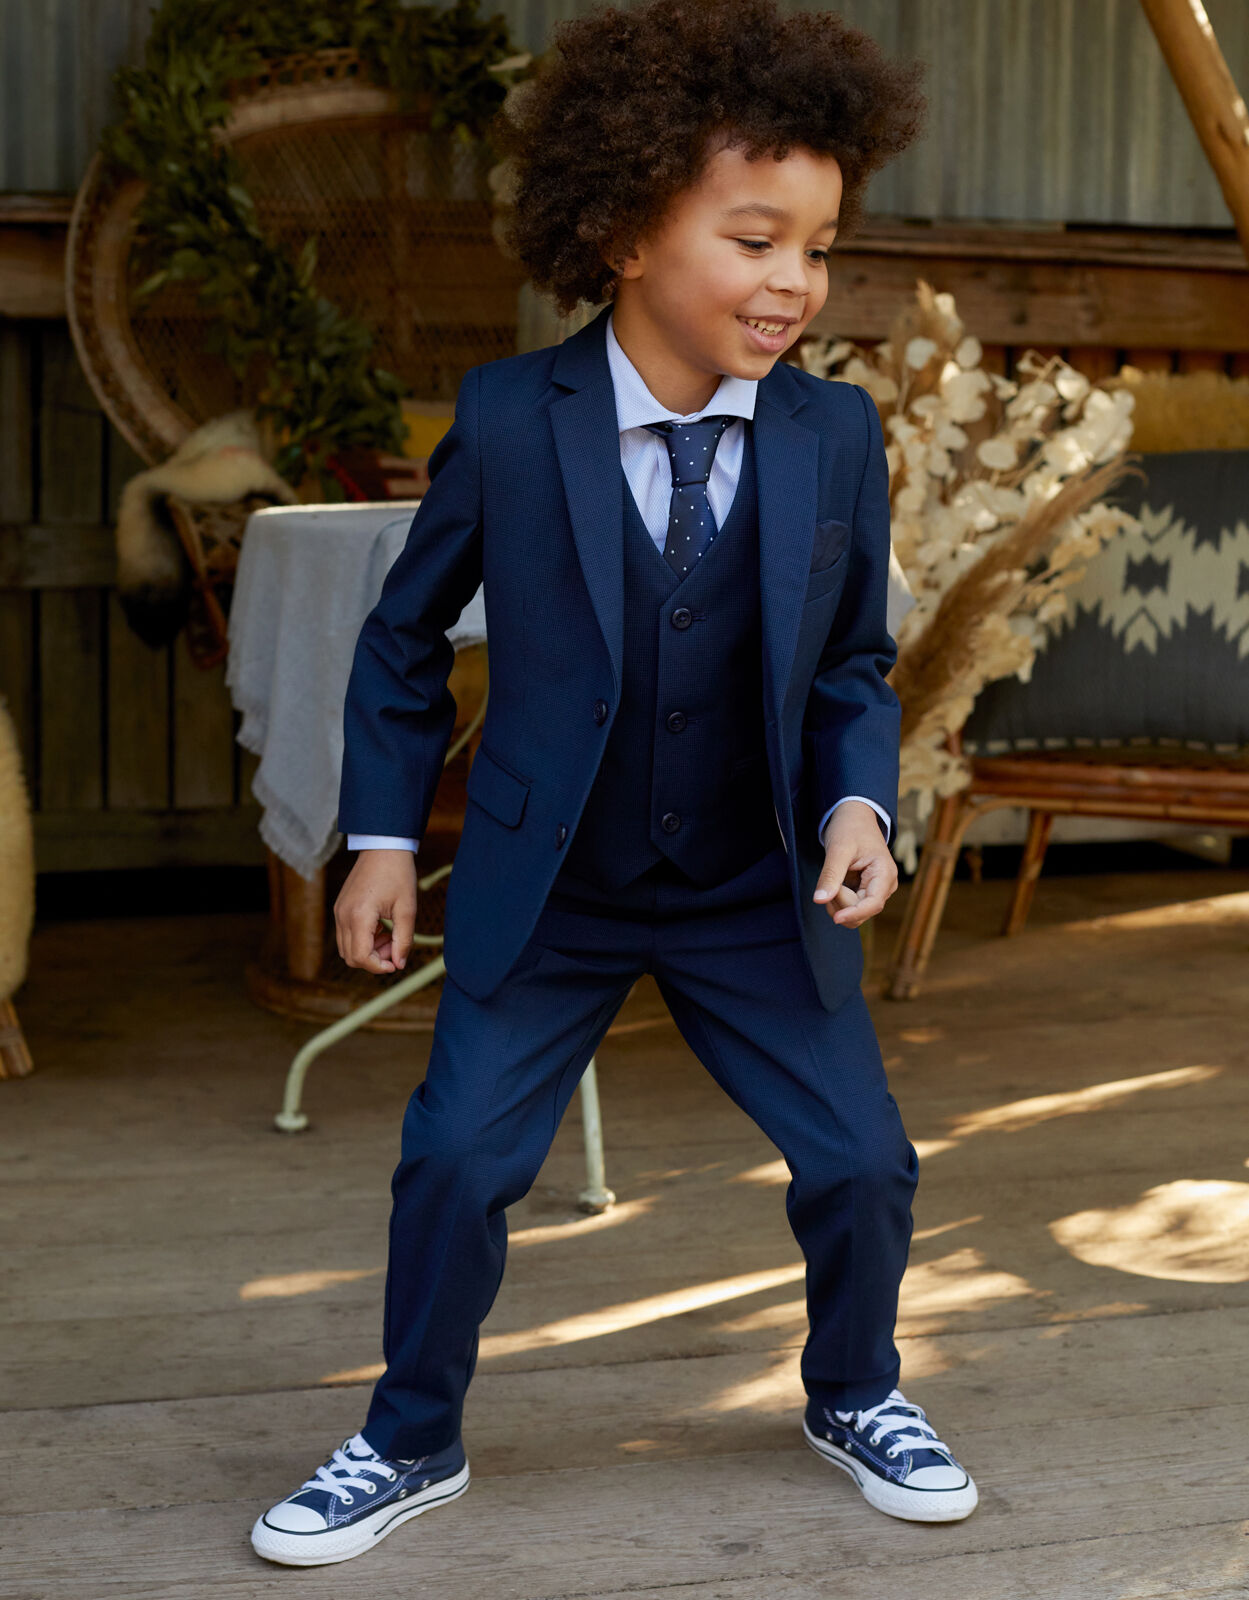 Boys Black Suit 5 Piece Wedding Page Boy Baby Formal Party Smart 0-3 - 14 yrs 